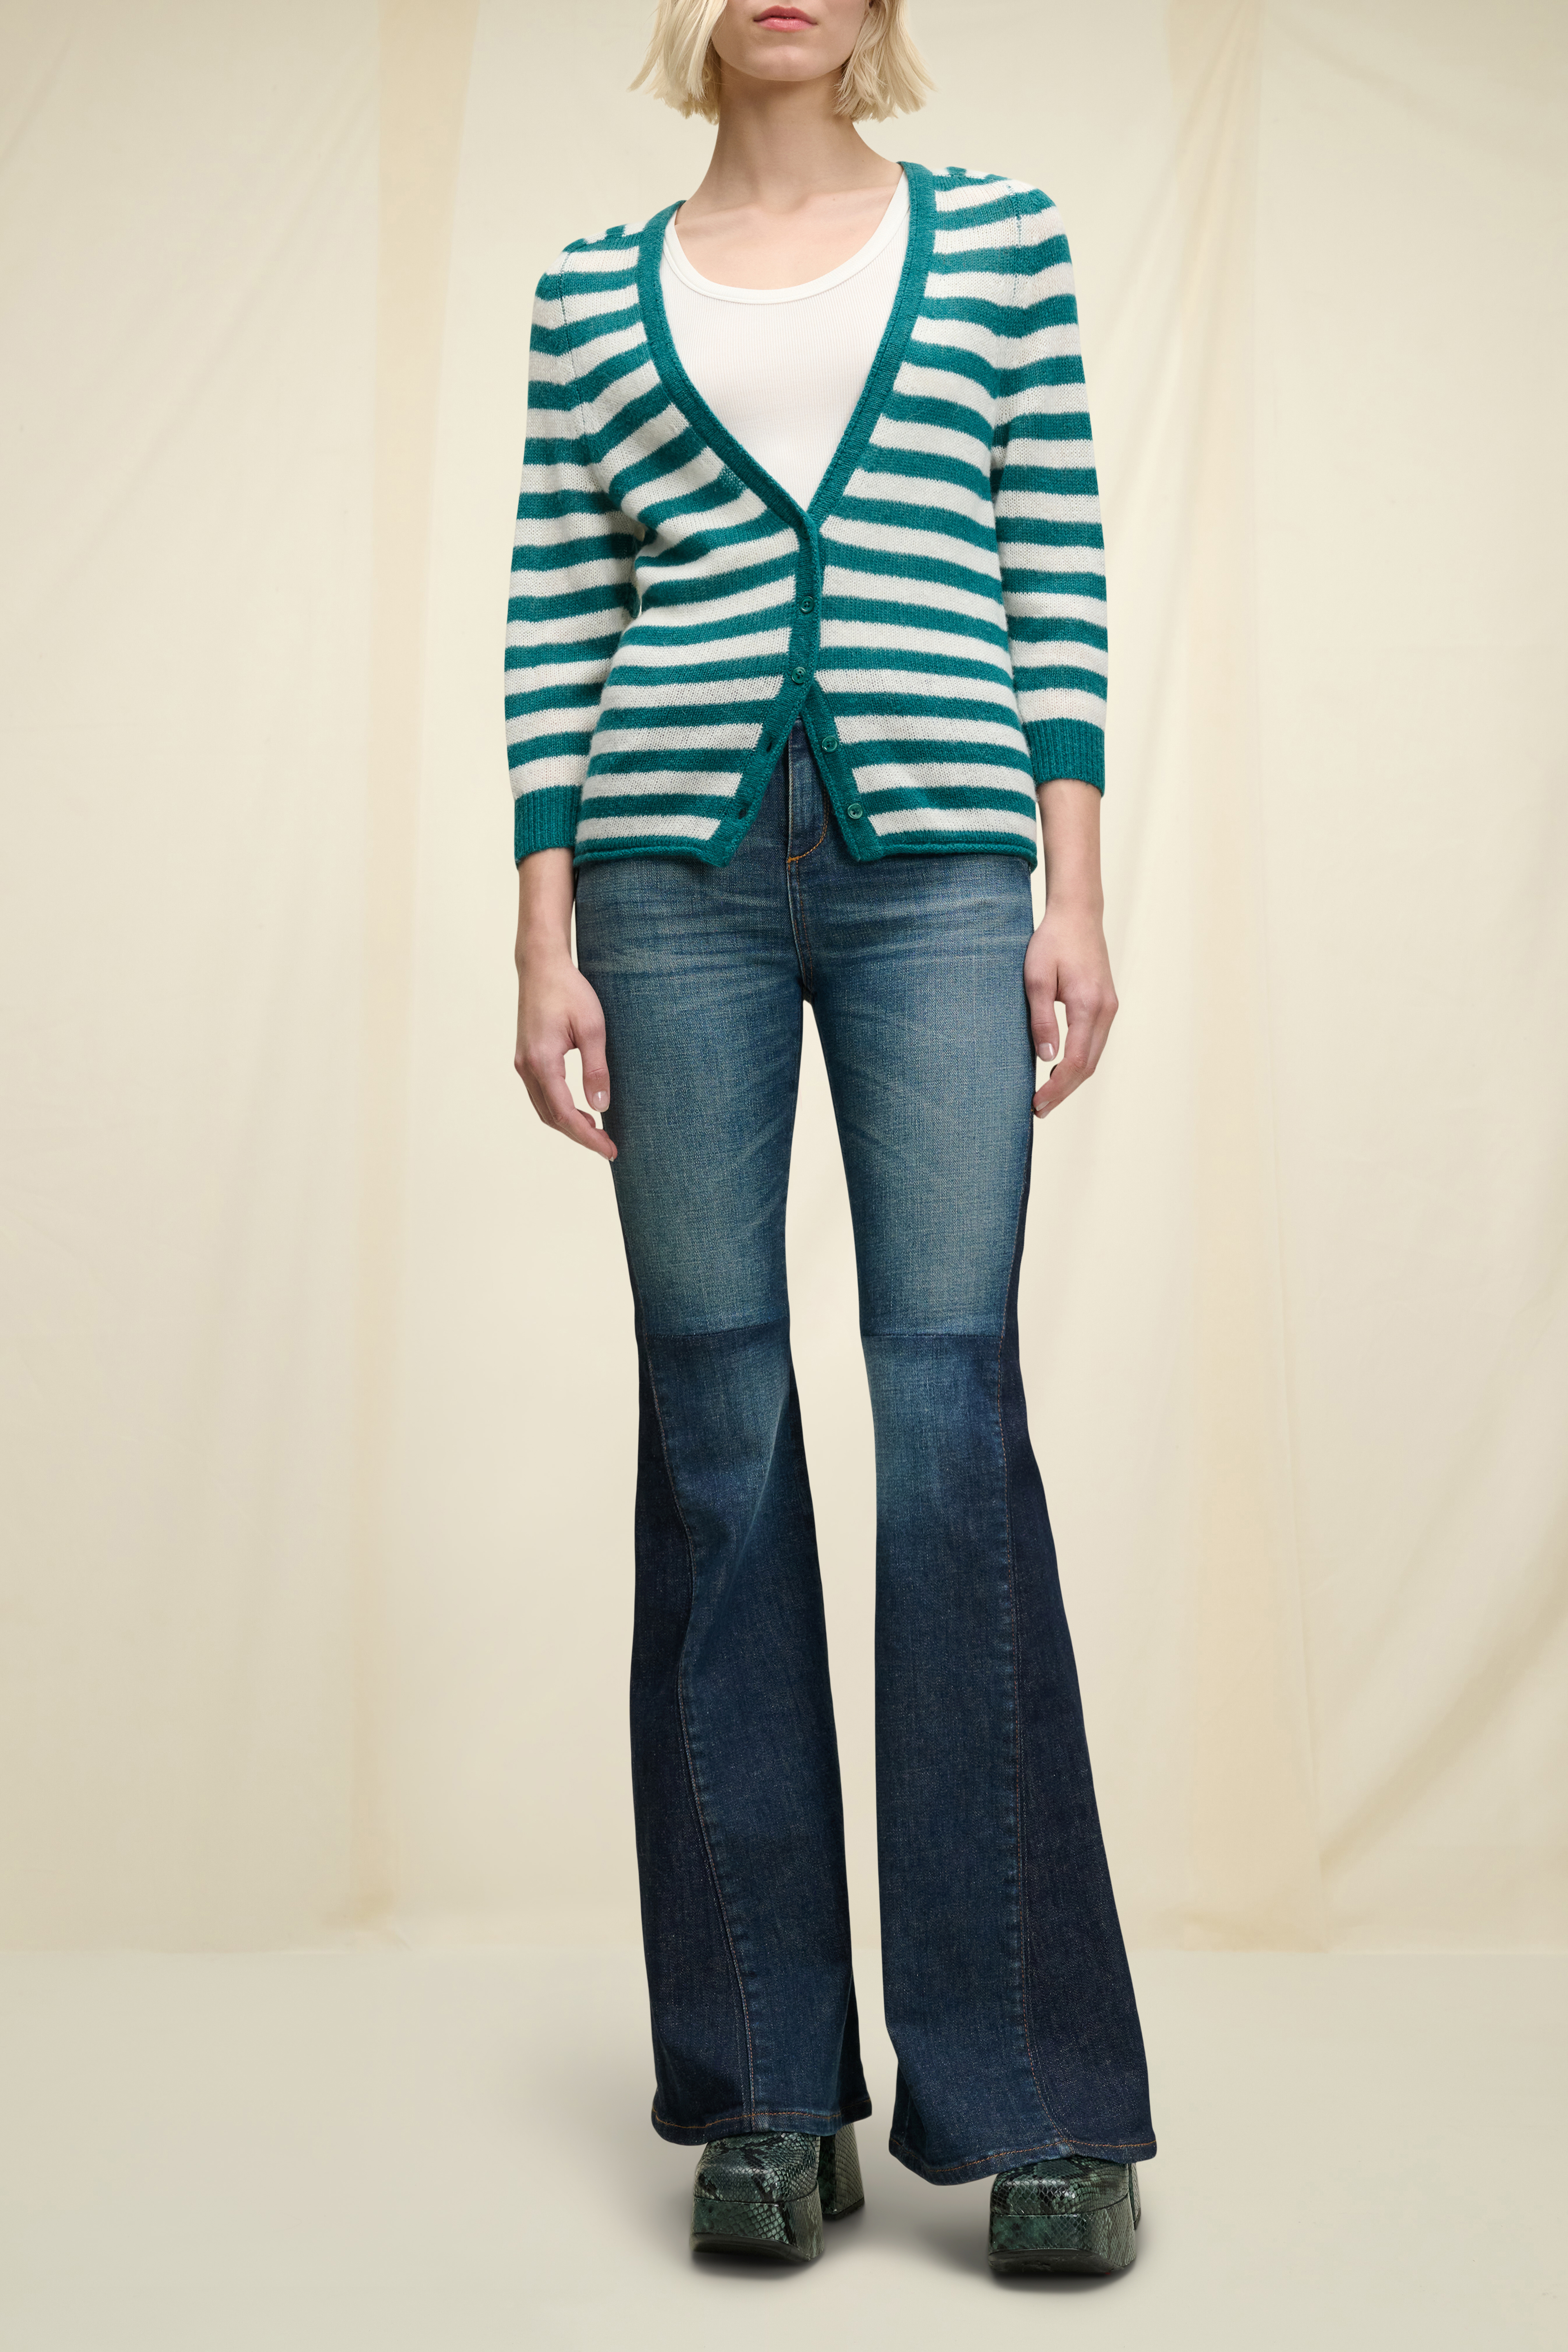 Dorothee Schumacher Striped cardigan with a